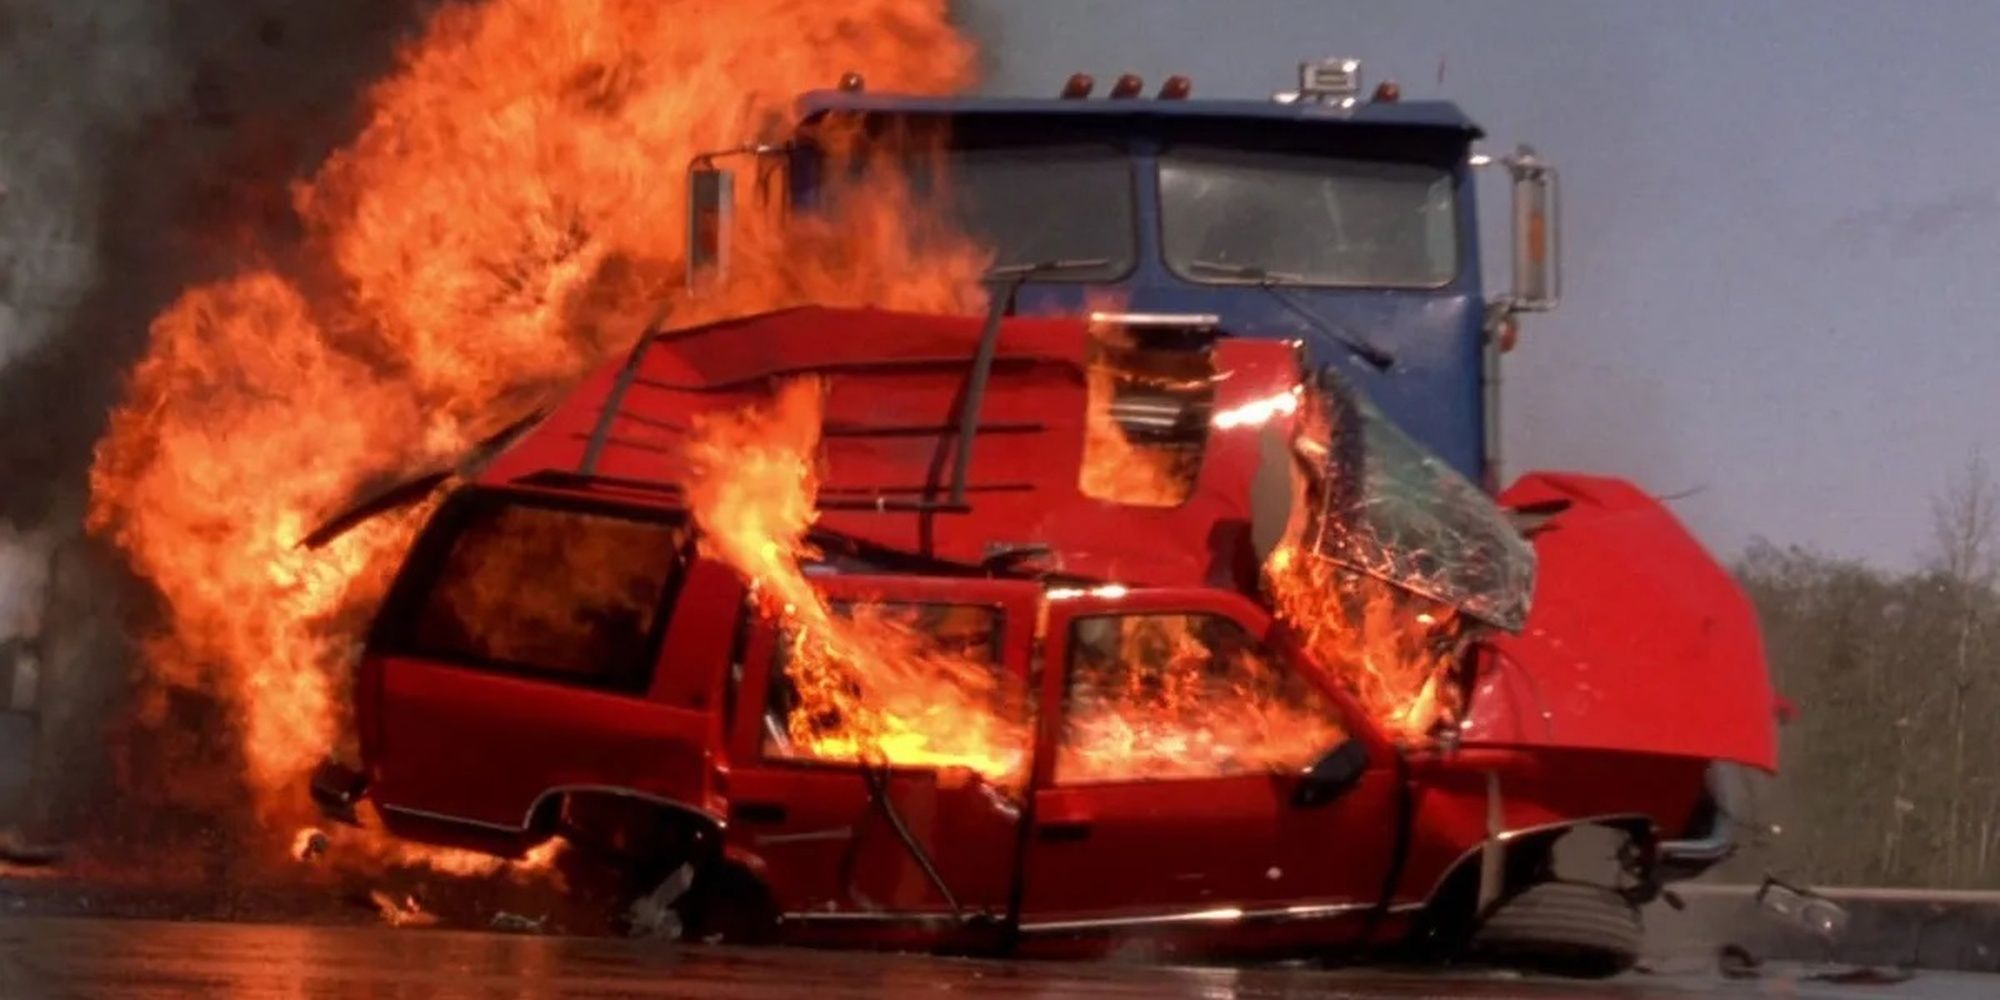 A flaming car hit by a truck